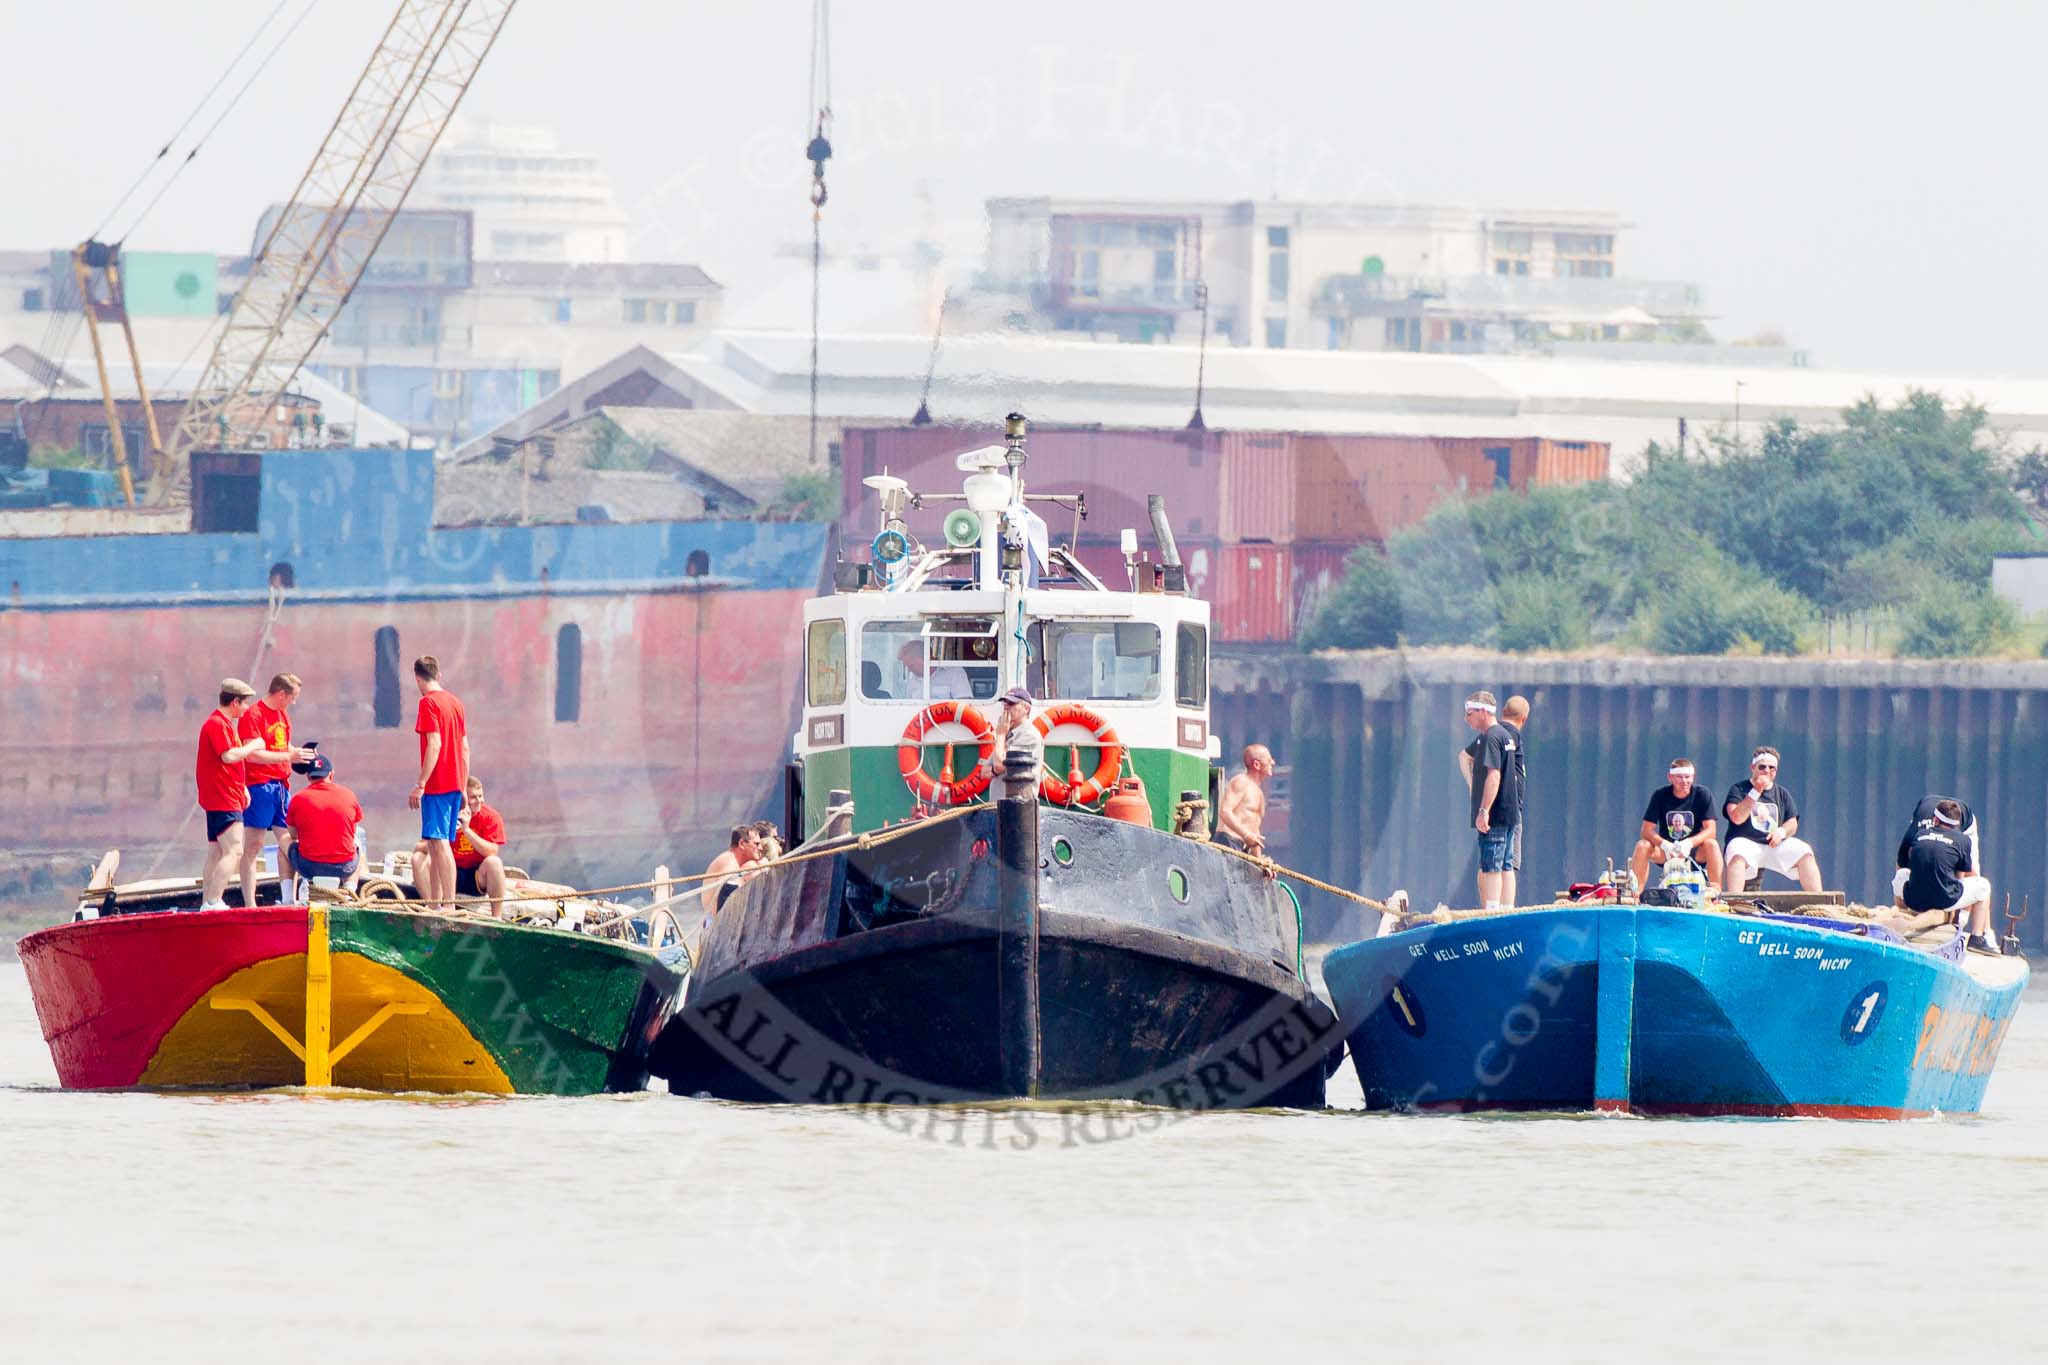 TOW River Thames Barge Driving Race 2013: Barges  "Darren Lacey", by Princess Pocahontas, and "Jane" by the RMT Union, next to tug "Horton", before the start of the race..
River Thames between Greenwich and Westminster,
London,

United Kingdom,
on 13 July 2013 at 12:09, image #49